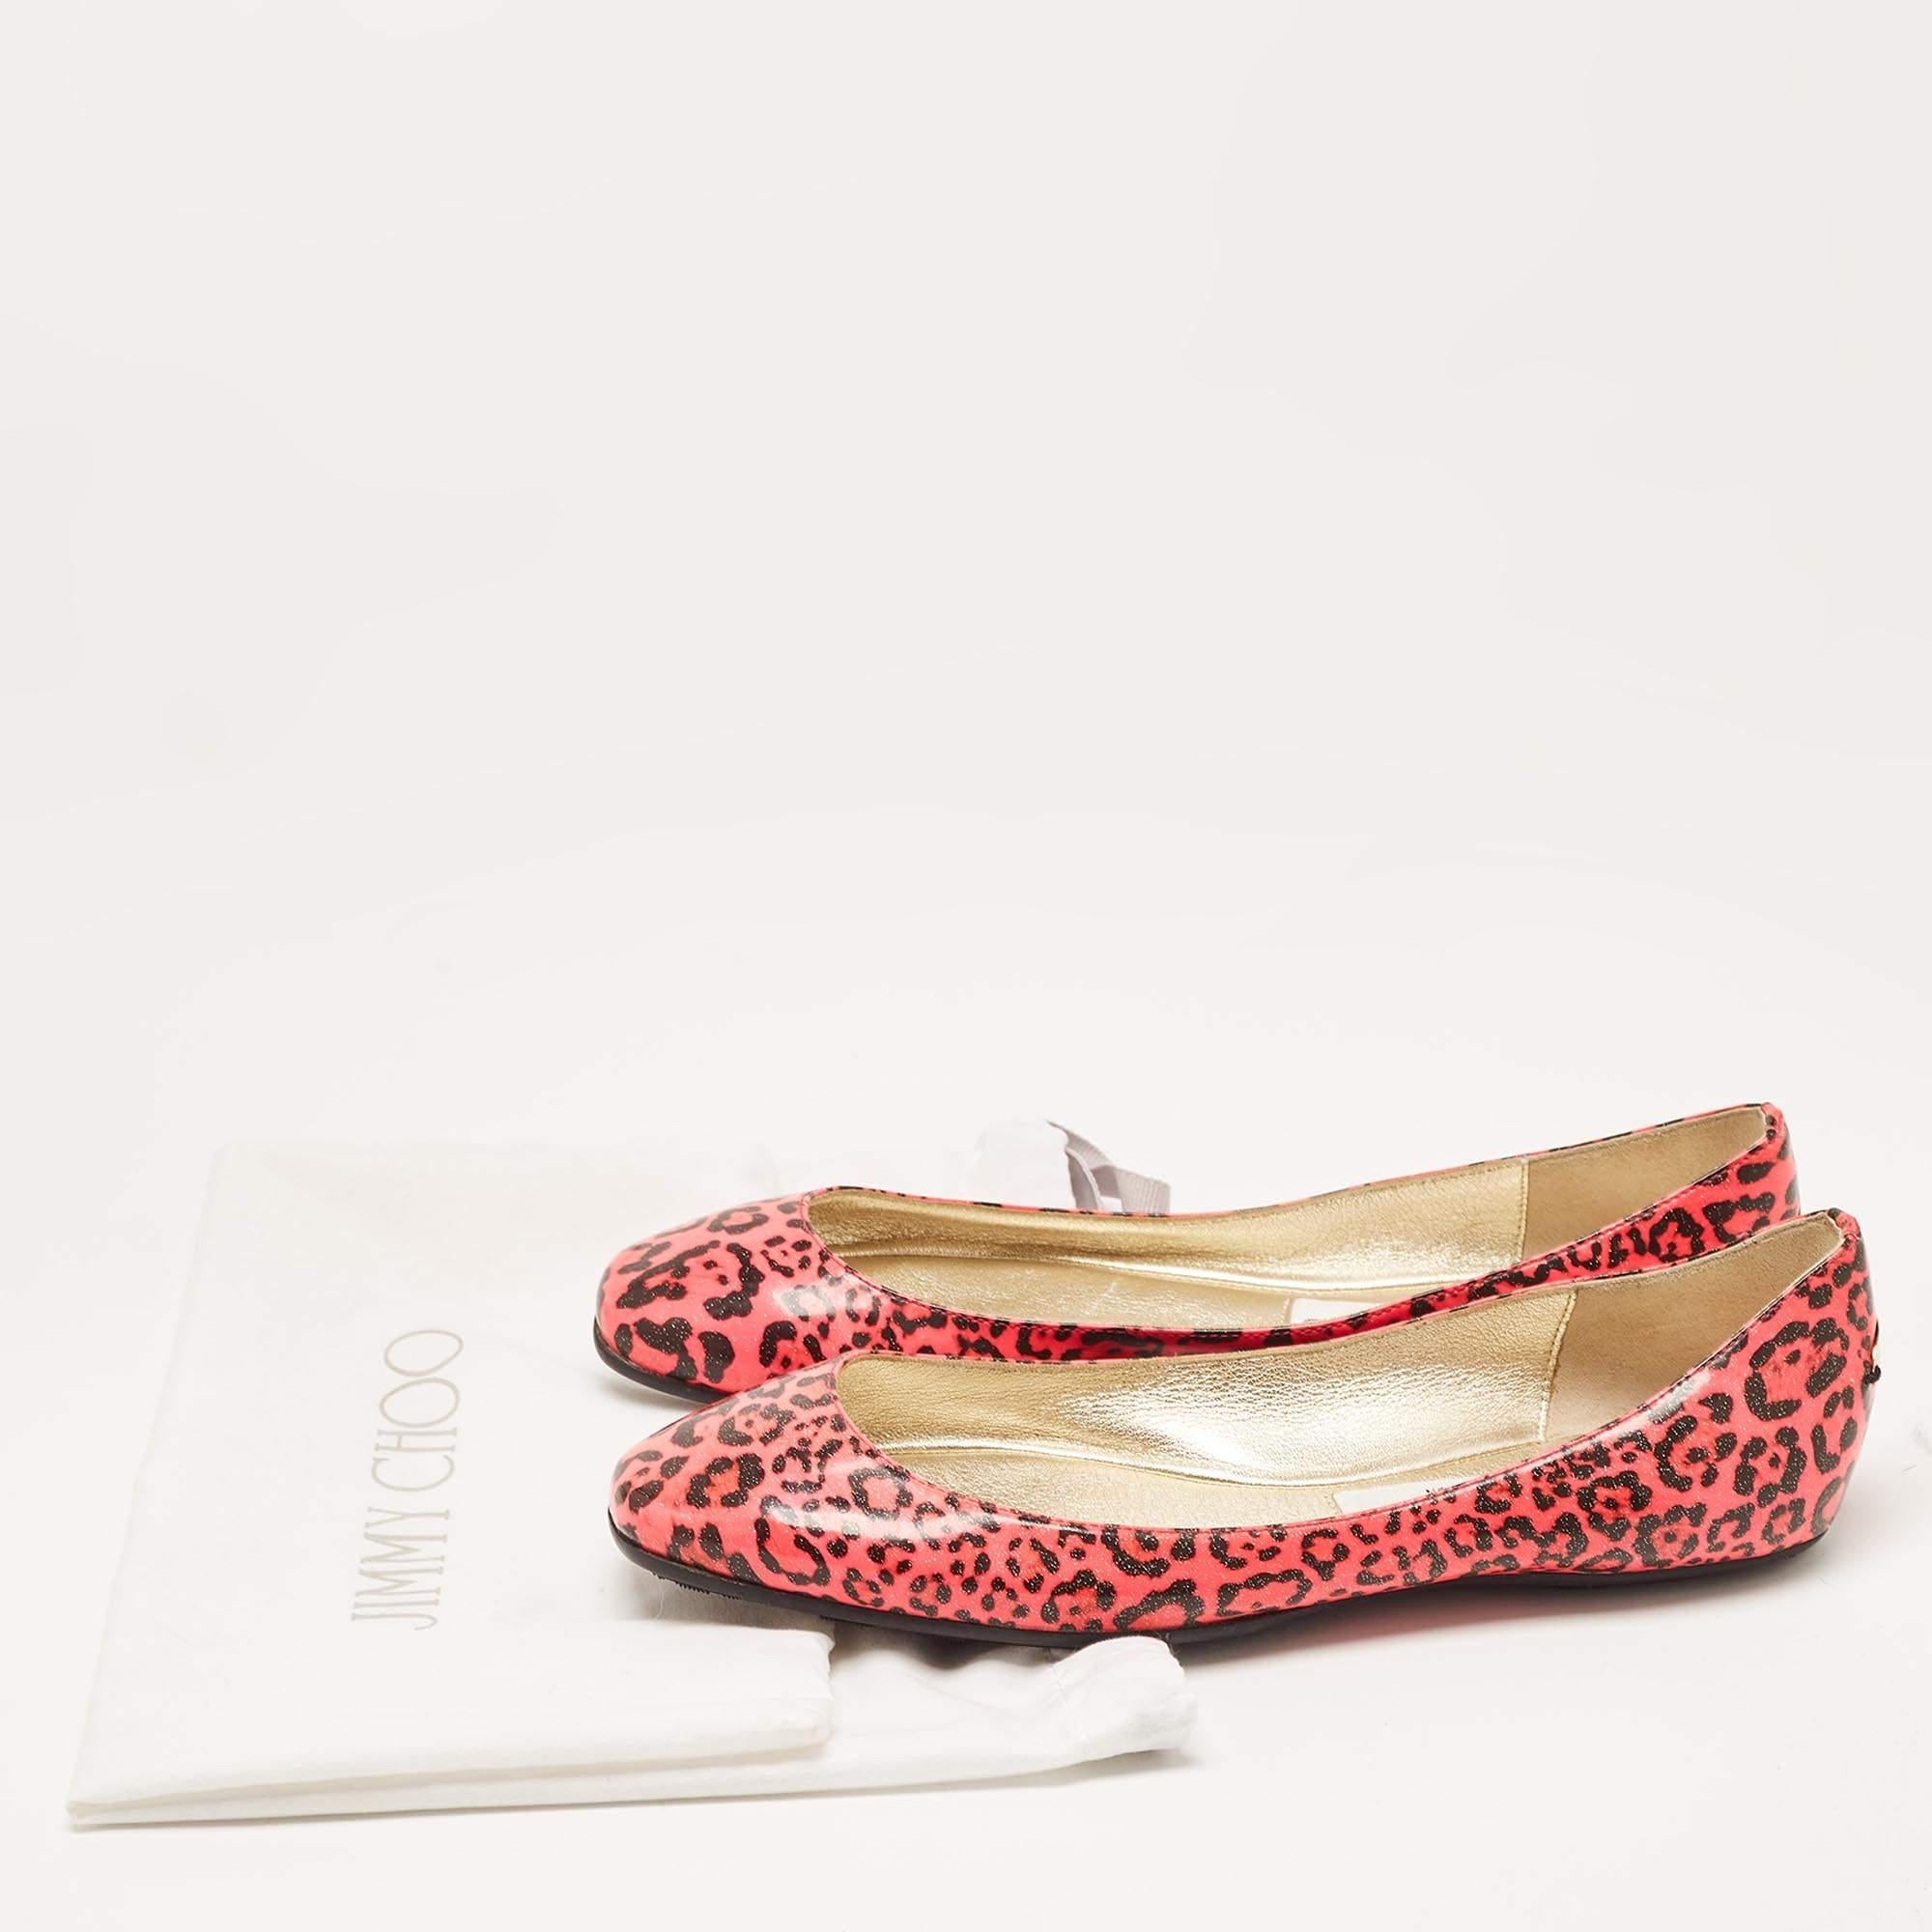 Jimmy Choo Pink/Black Leopard Print Patent Leather Ballet Flats Size 37 For Sale 4